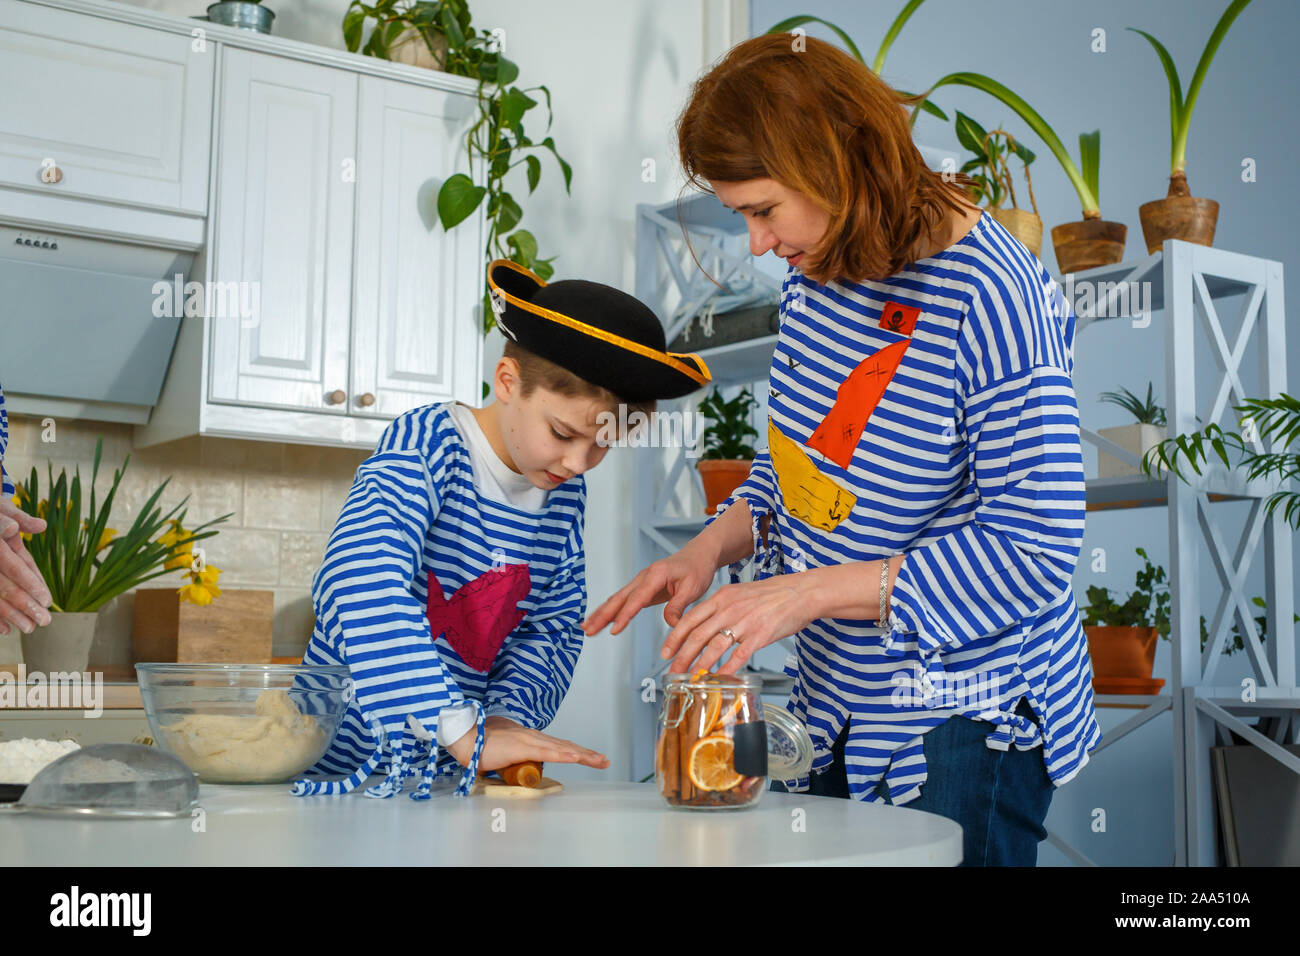 Photo session - friendly family. The family cooks together. Mom and son knead the dough with flour. Prepare the dough in the kitchen. Stock Photo